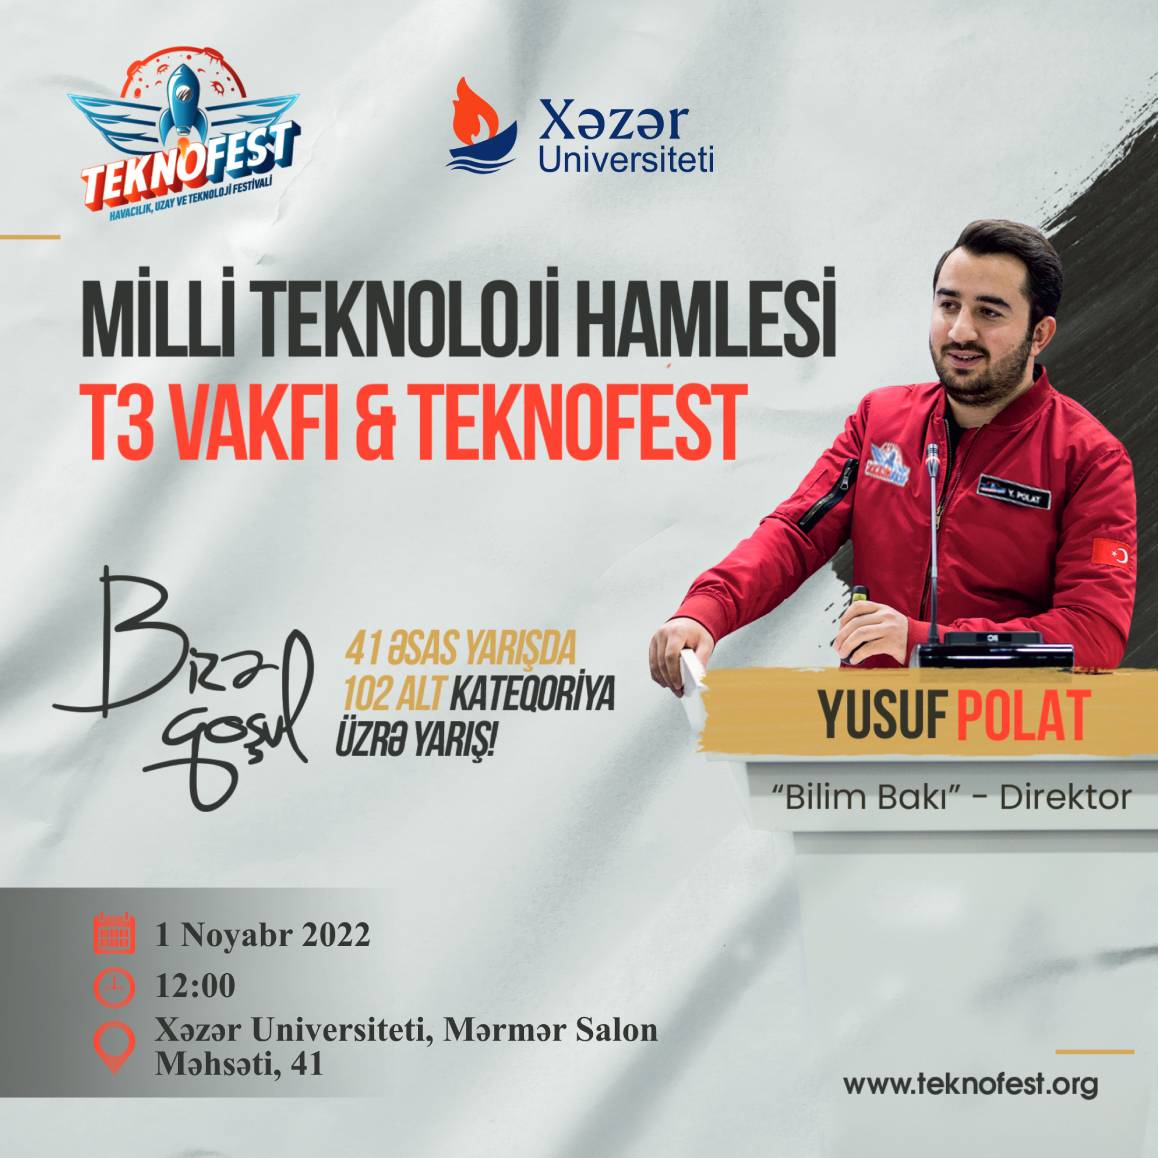 A meeting to be held with the director of the "Bilim Baku" center, the official representative of "Teknofest" in Azerbaijan